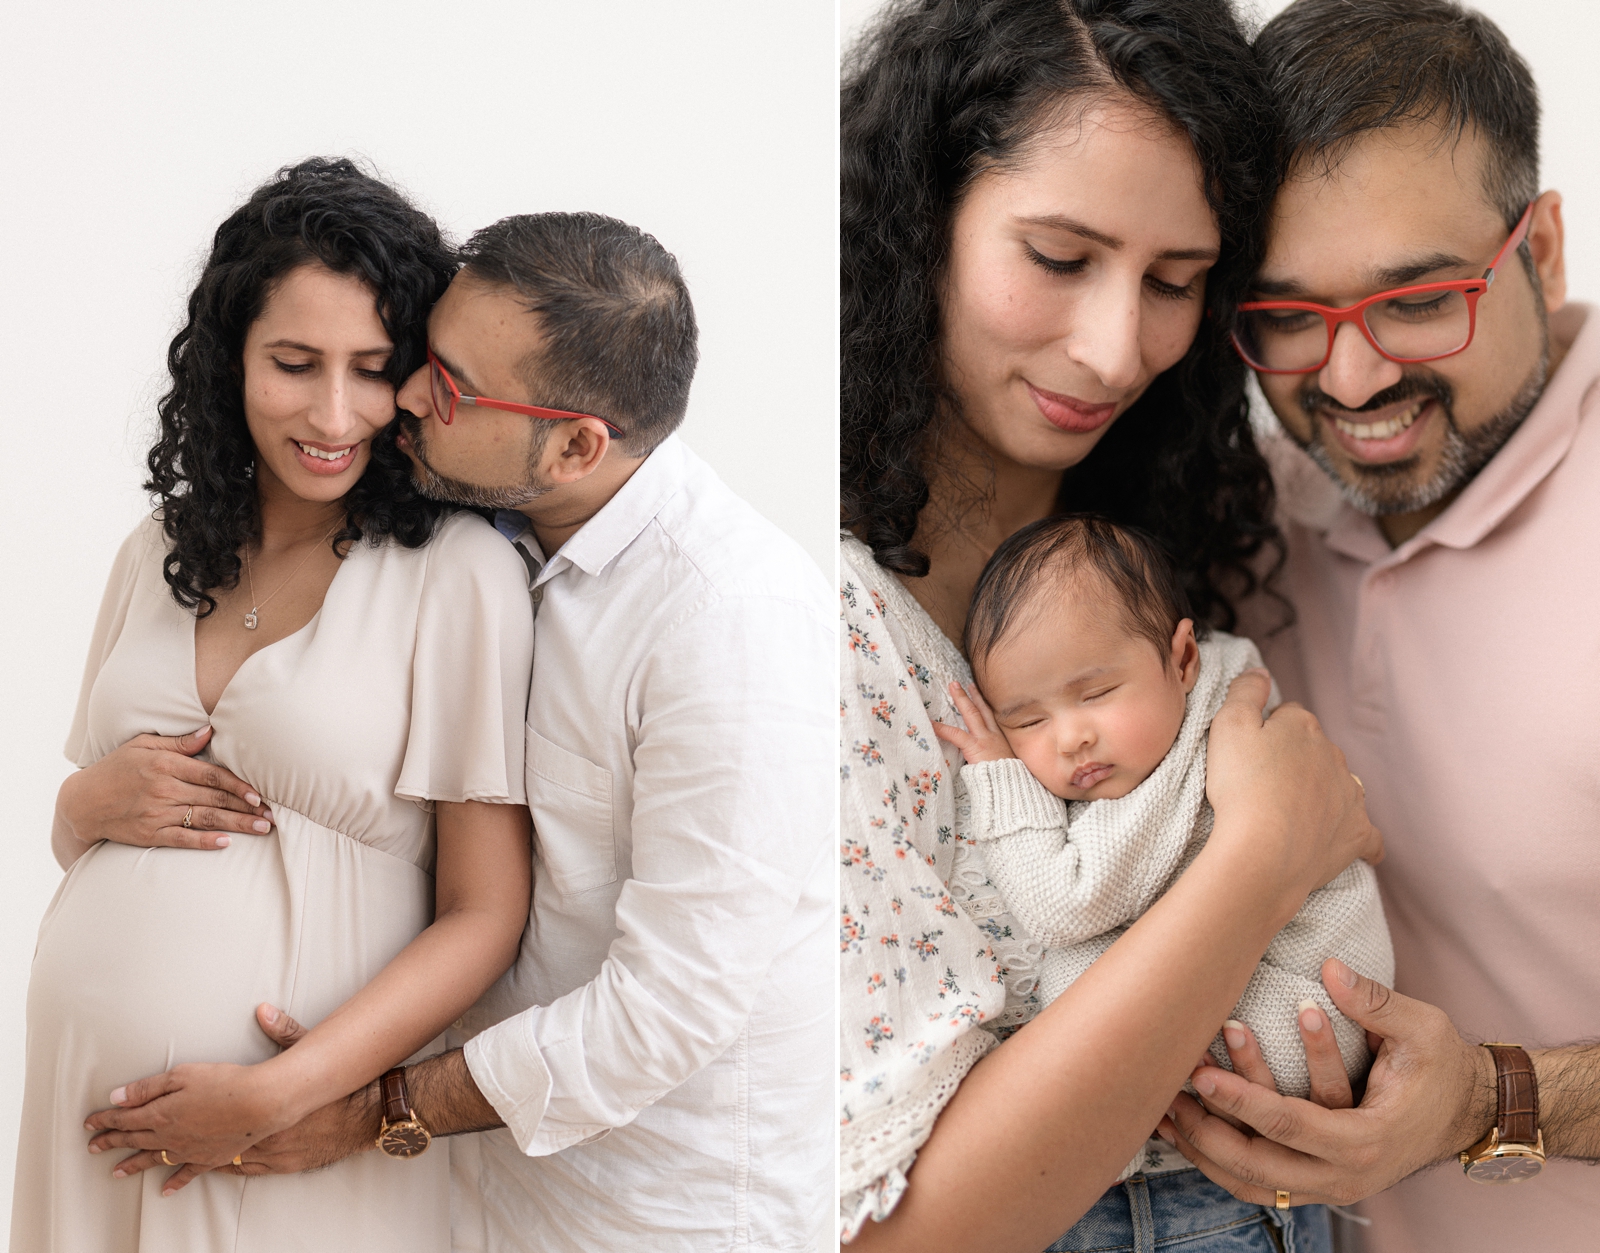 maternity and newborn photography showcases the best before and after in your life